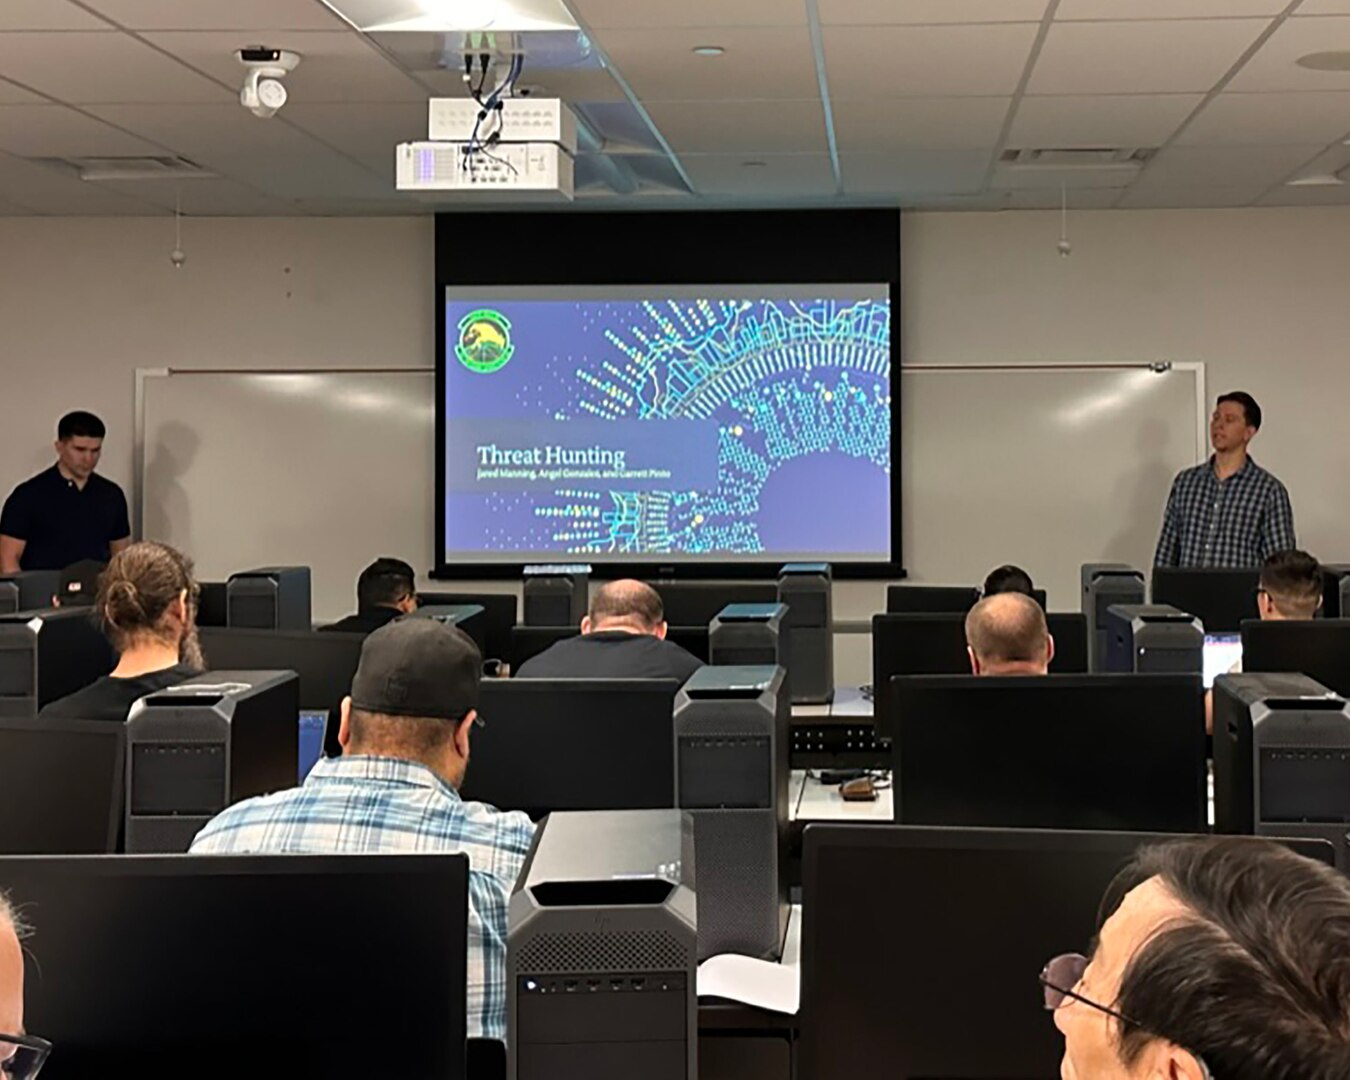 Attendees receive a seminar on Threat Hunting from the cyberspace curriculum at the Central New Mexico Community College in Albuquerque, New Mexico on July 21, 2023. (Courtesy photo)